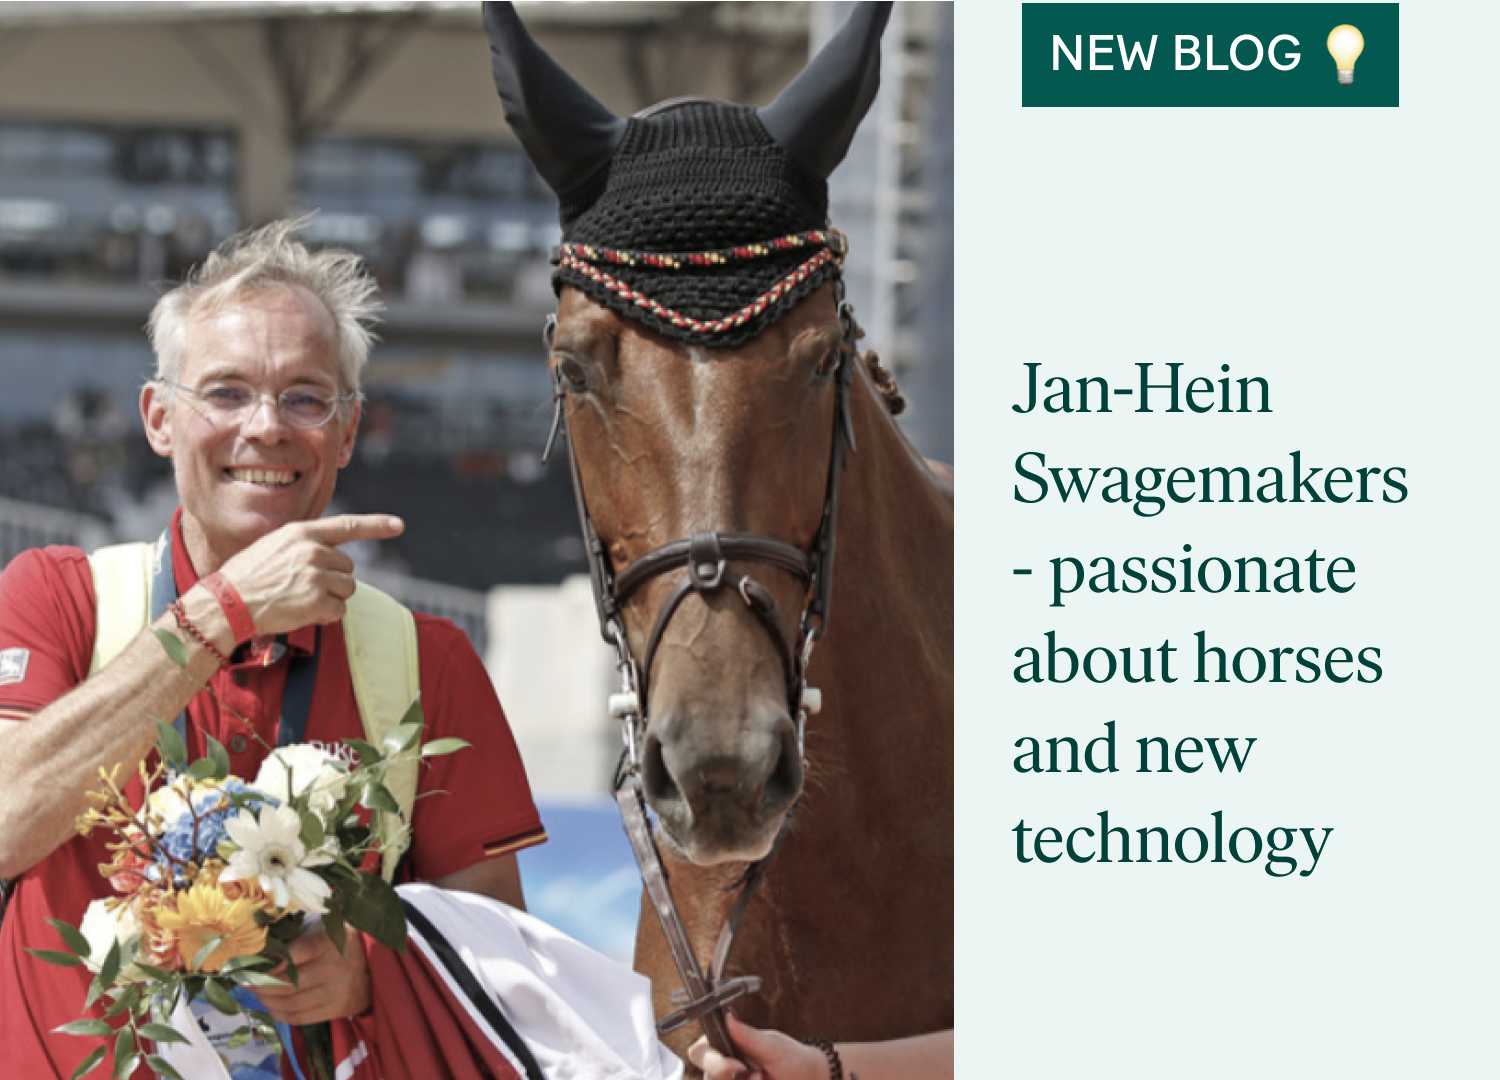 Jan-Hein Swagemakers: “Horses need a vacation too”